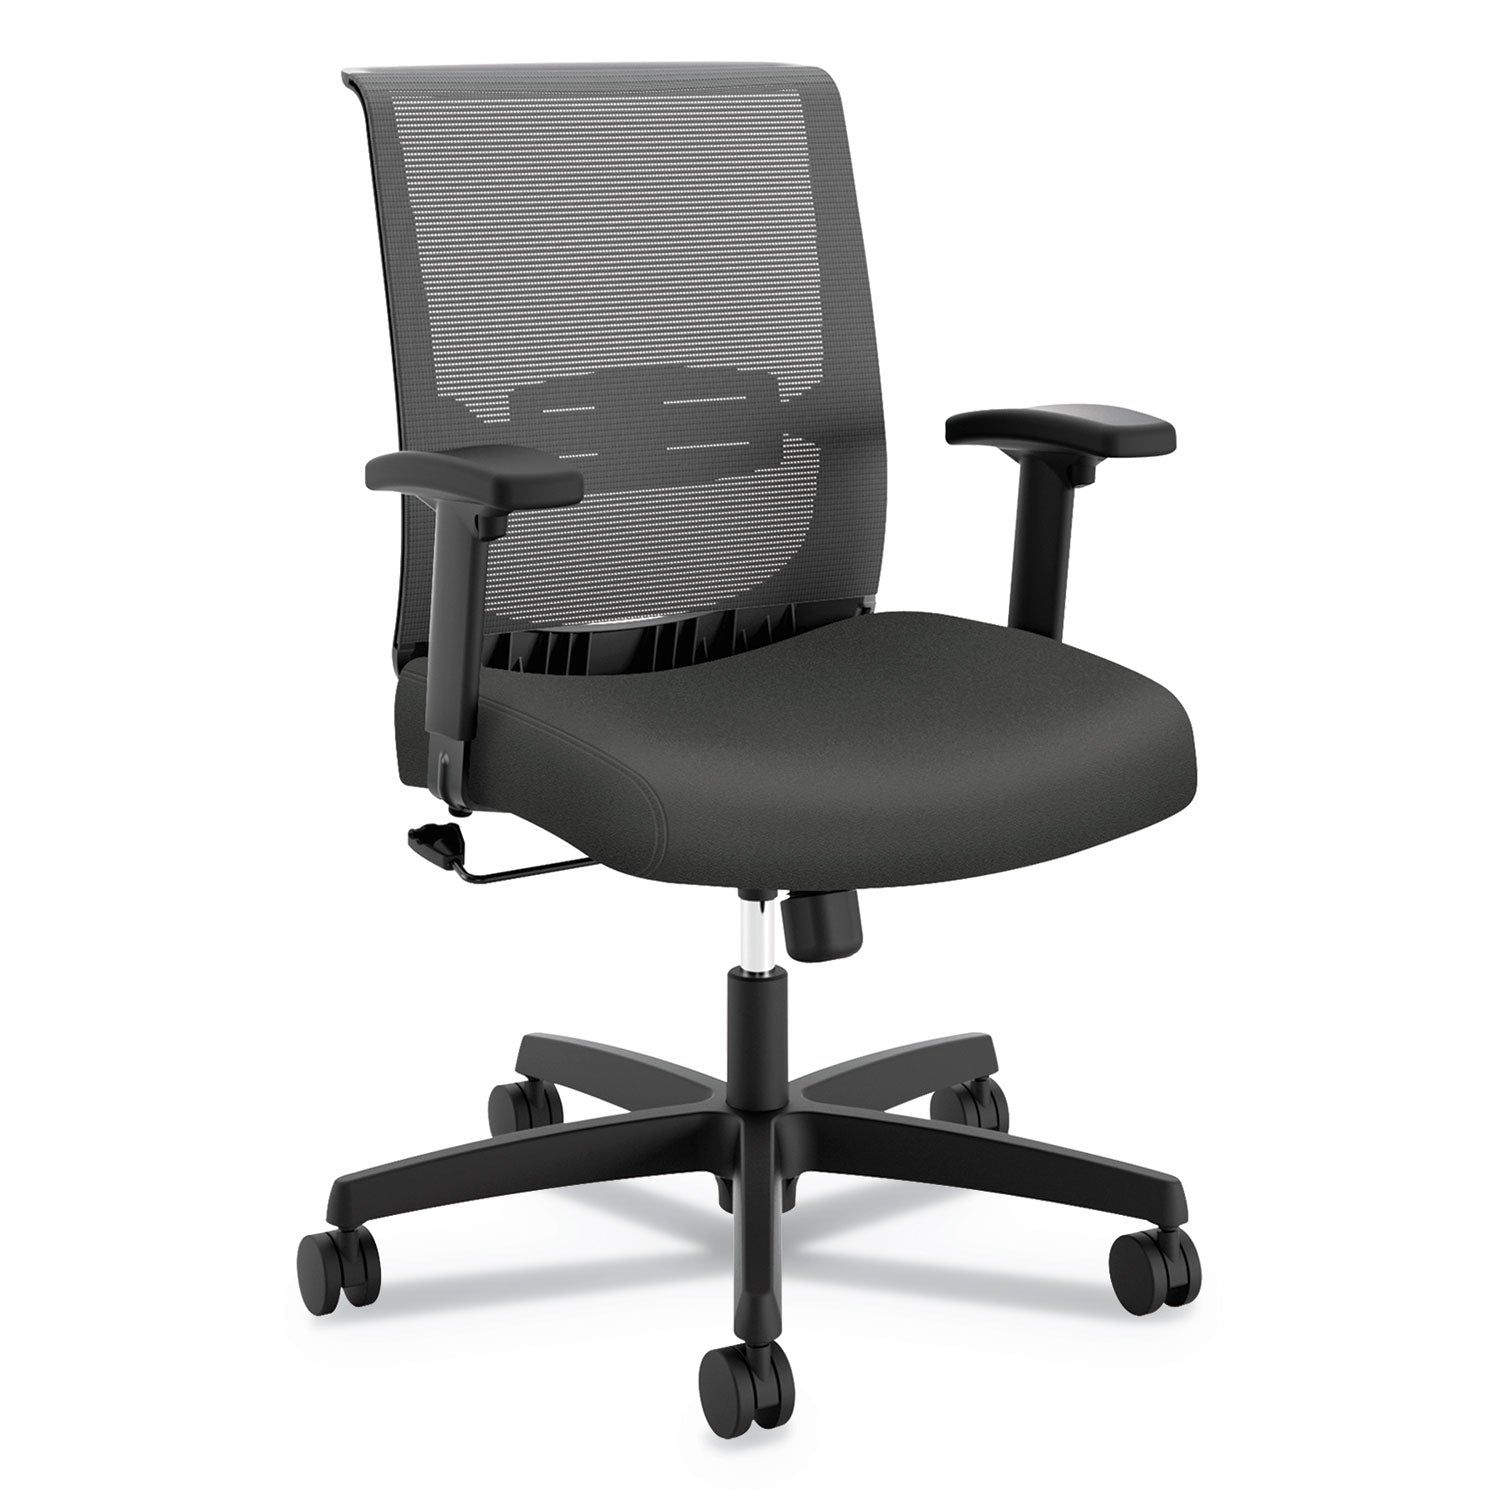 convergence-mid-back-task-chair-swivel-tilt-supports-up-to-275-lb-165-to-21-seat-height-iron-ore-seat-black-back-base_honcmz1acu19 - 1